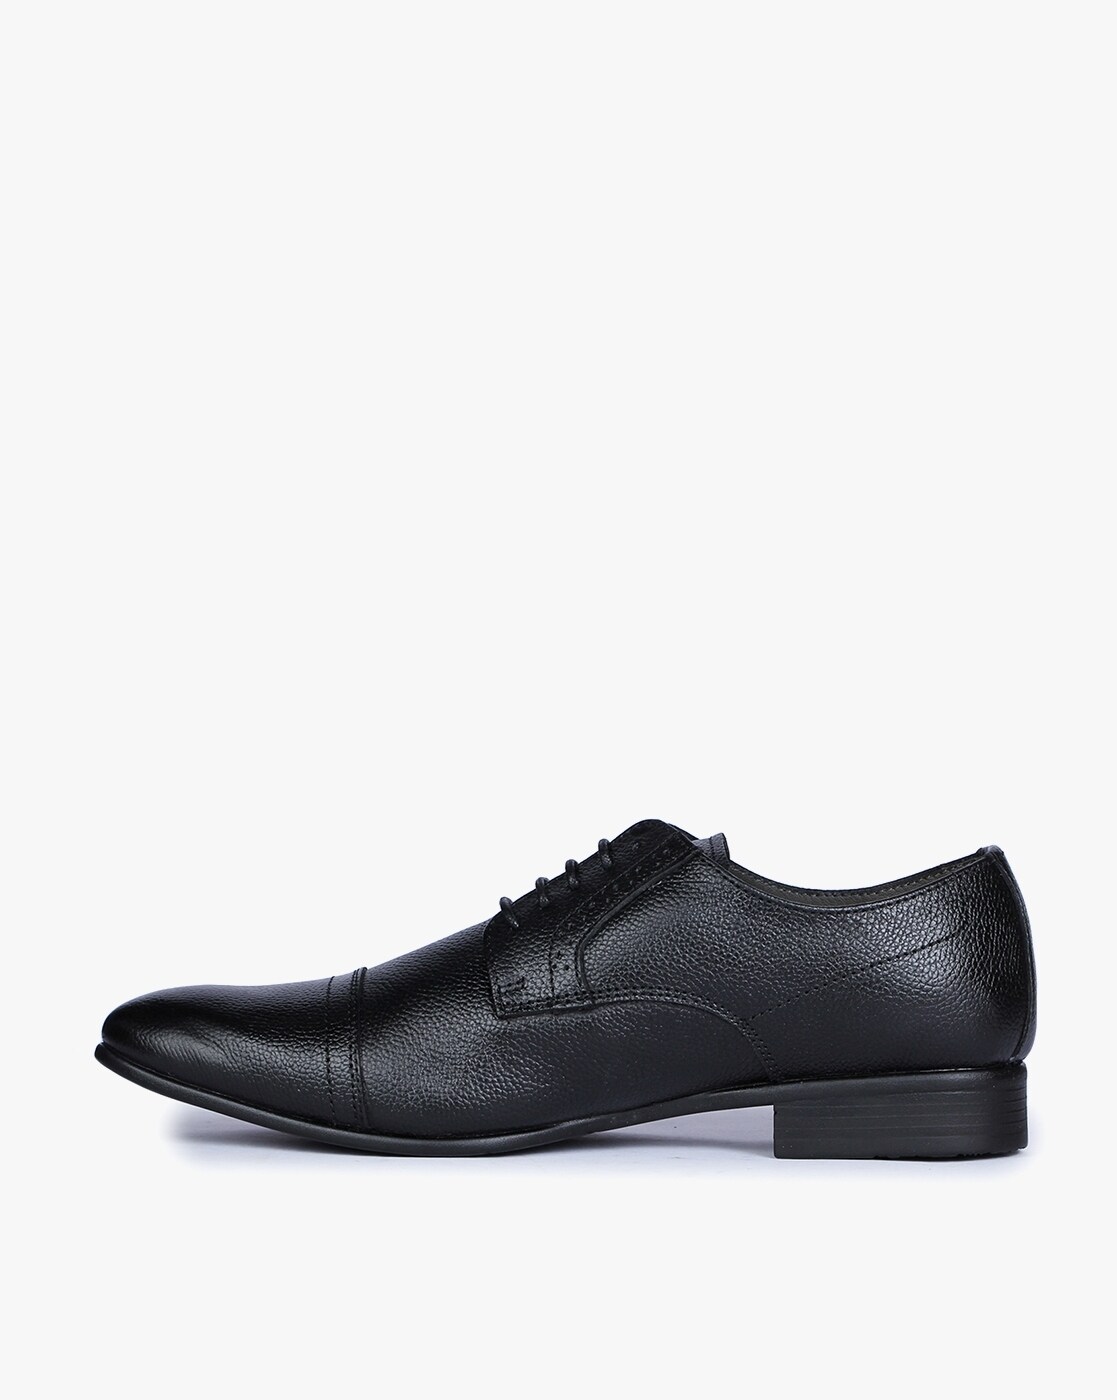 liberty black leather formal shoes